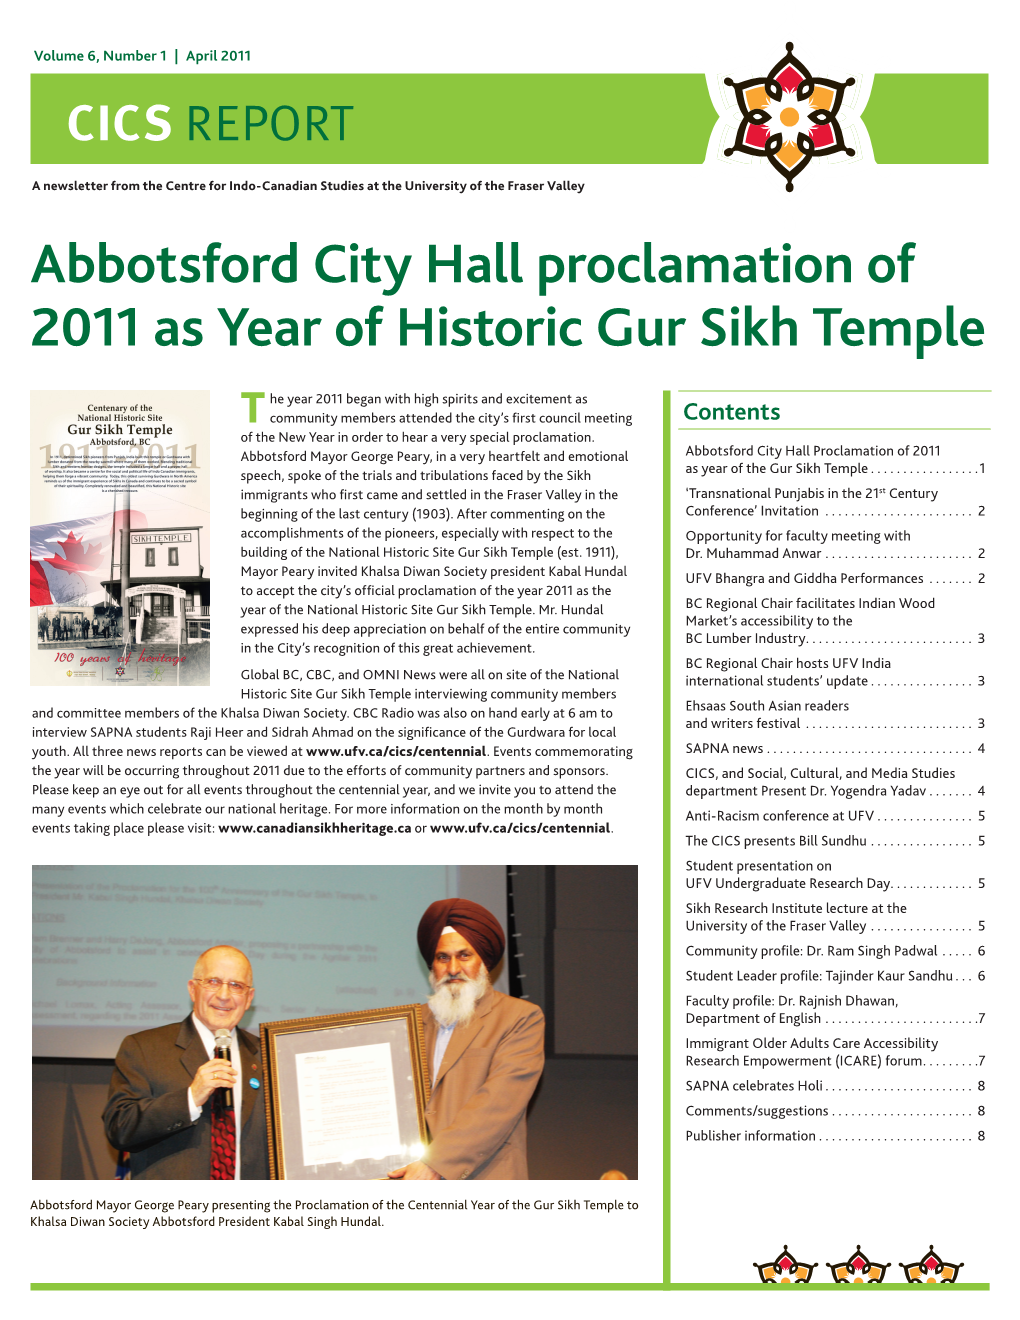 Abbotsford City Hall Proclamation of 2011 As Year of Historic Gur Sikh Temple